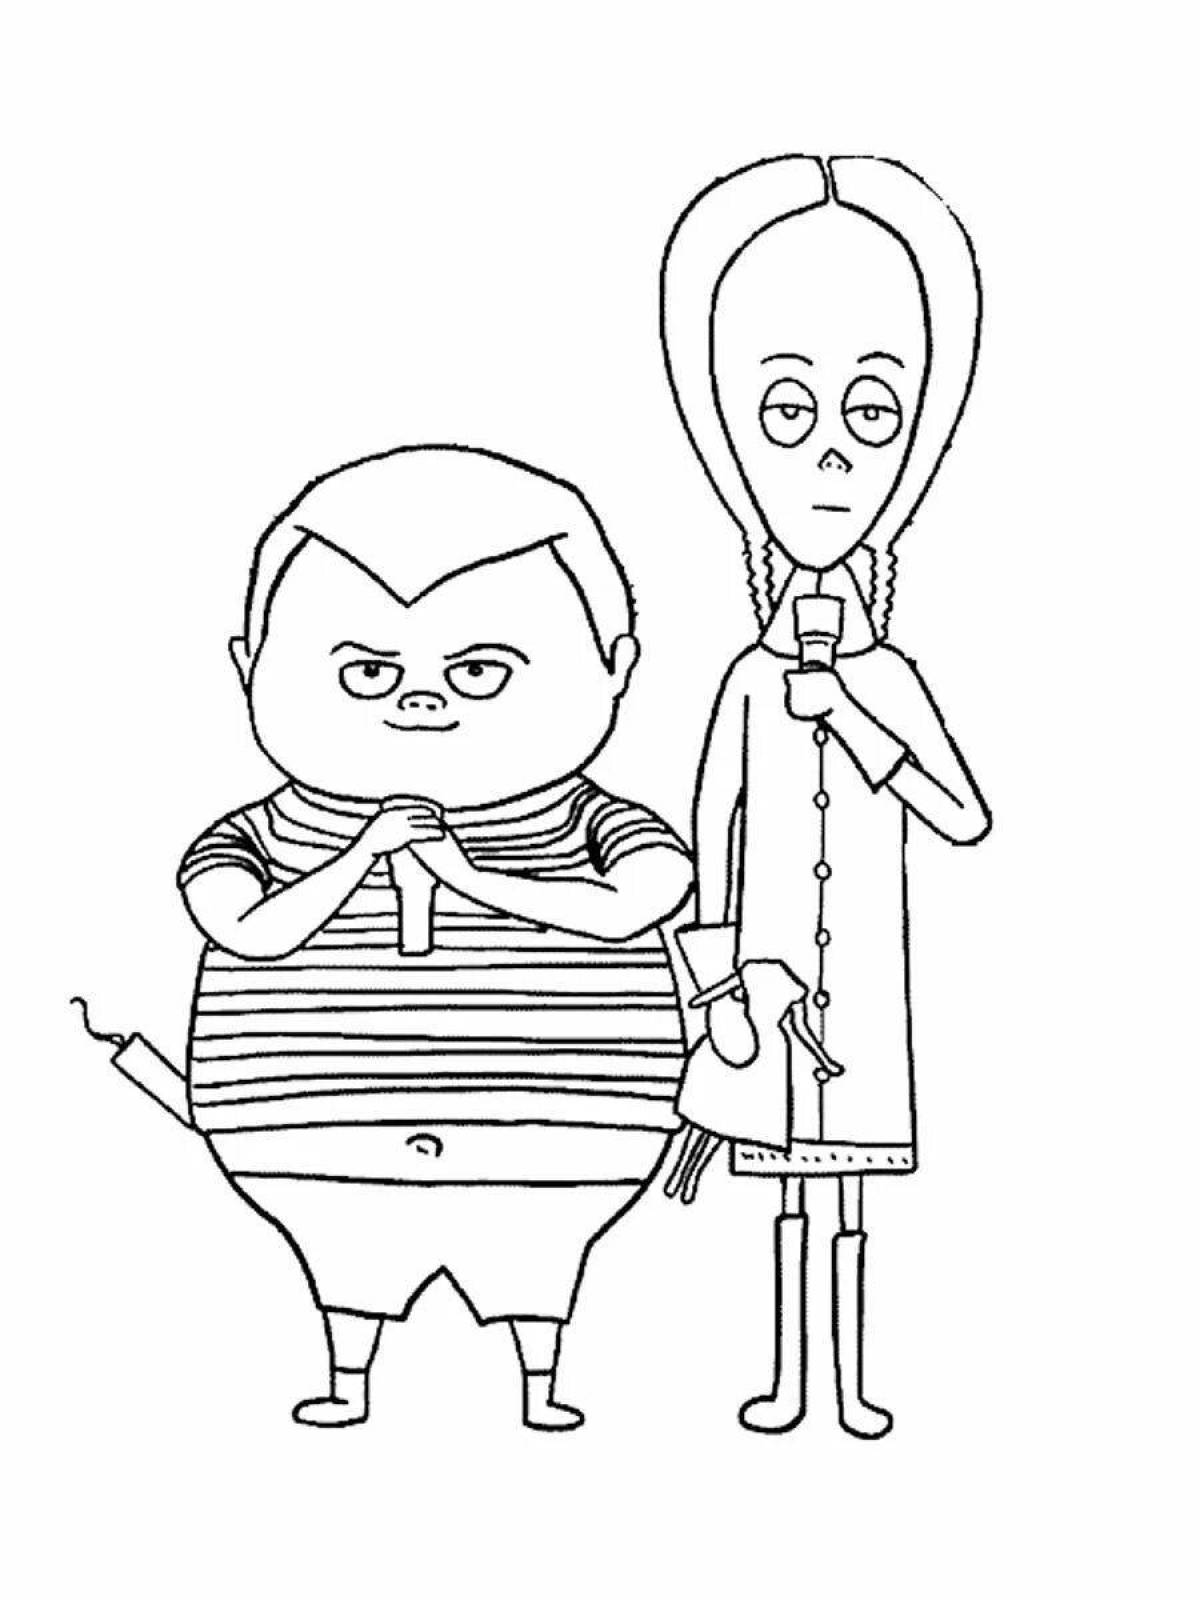 Adorable Addams Family coloring pages for kids